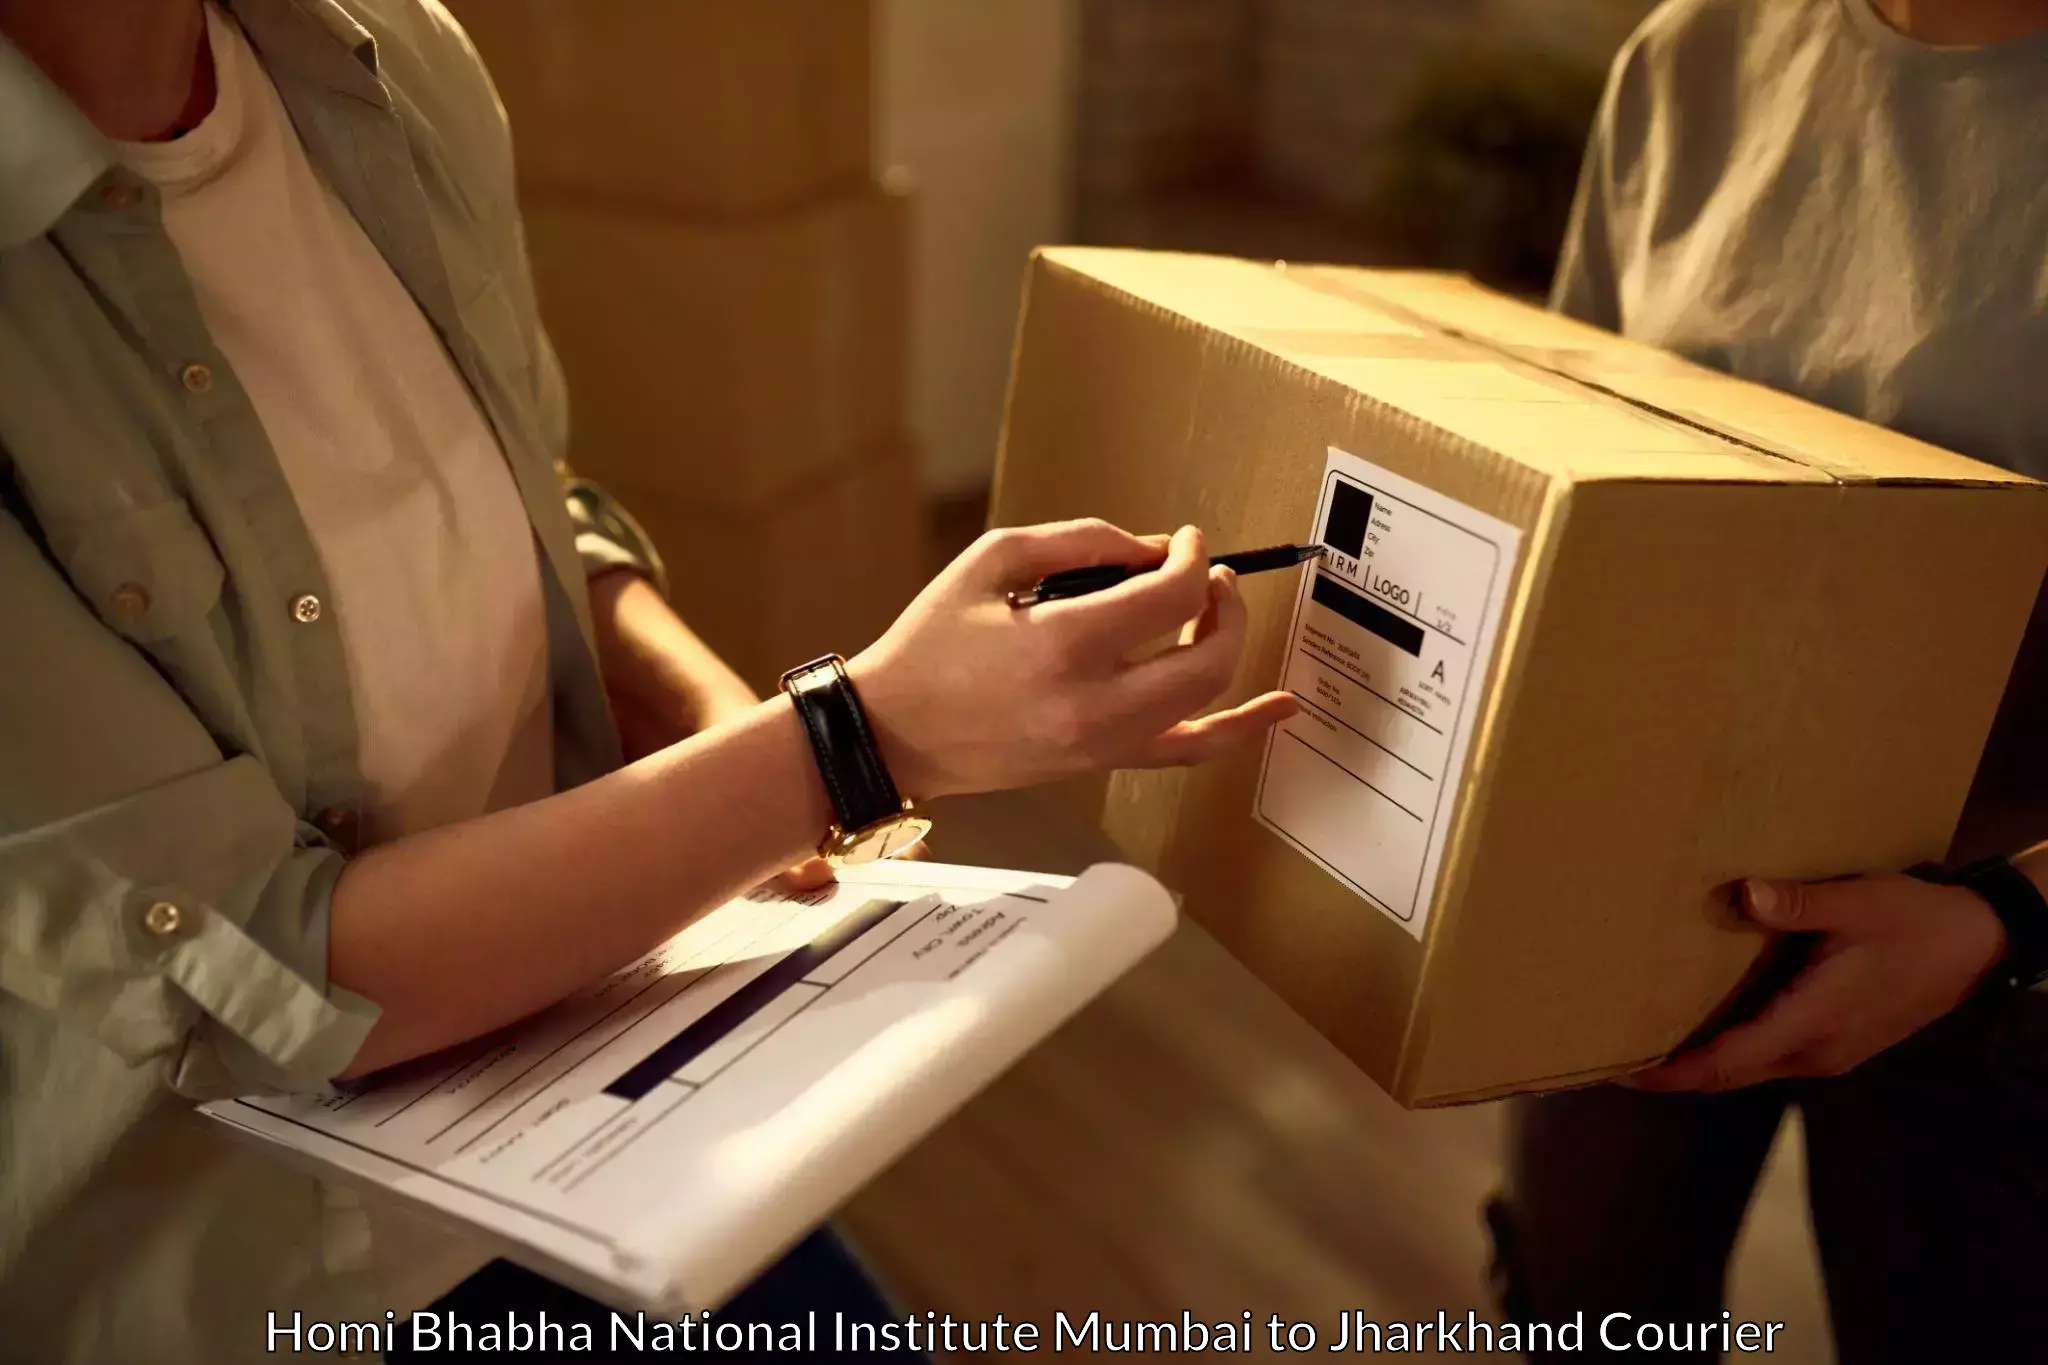 Easy access courier services Homi Bhabha National Institute Mumbai to Jharkhand